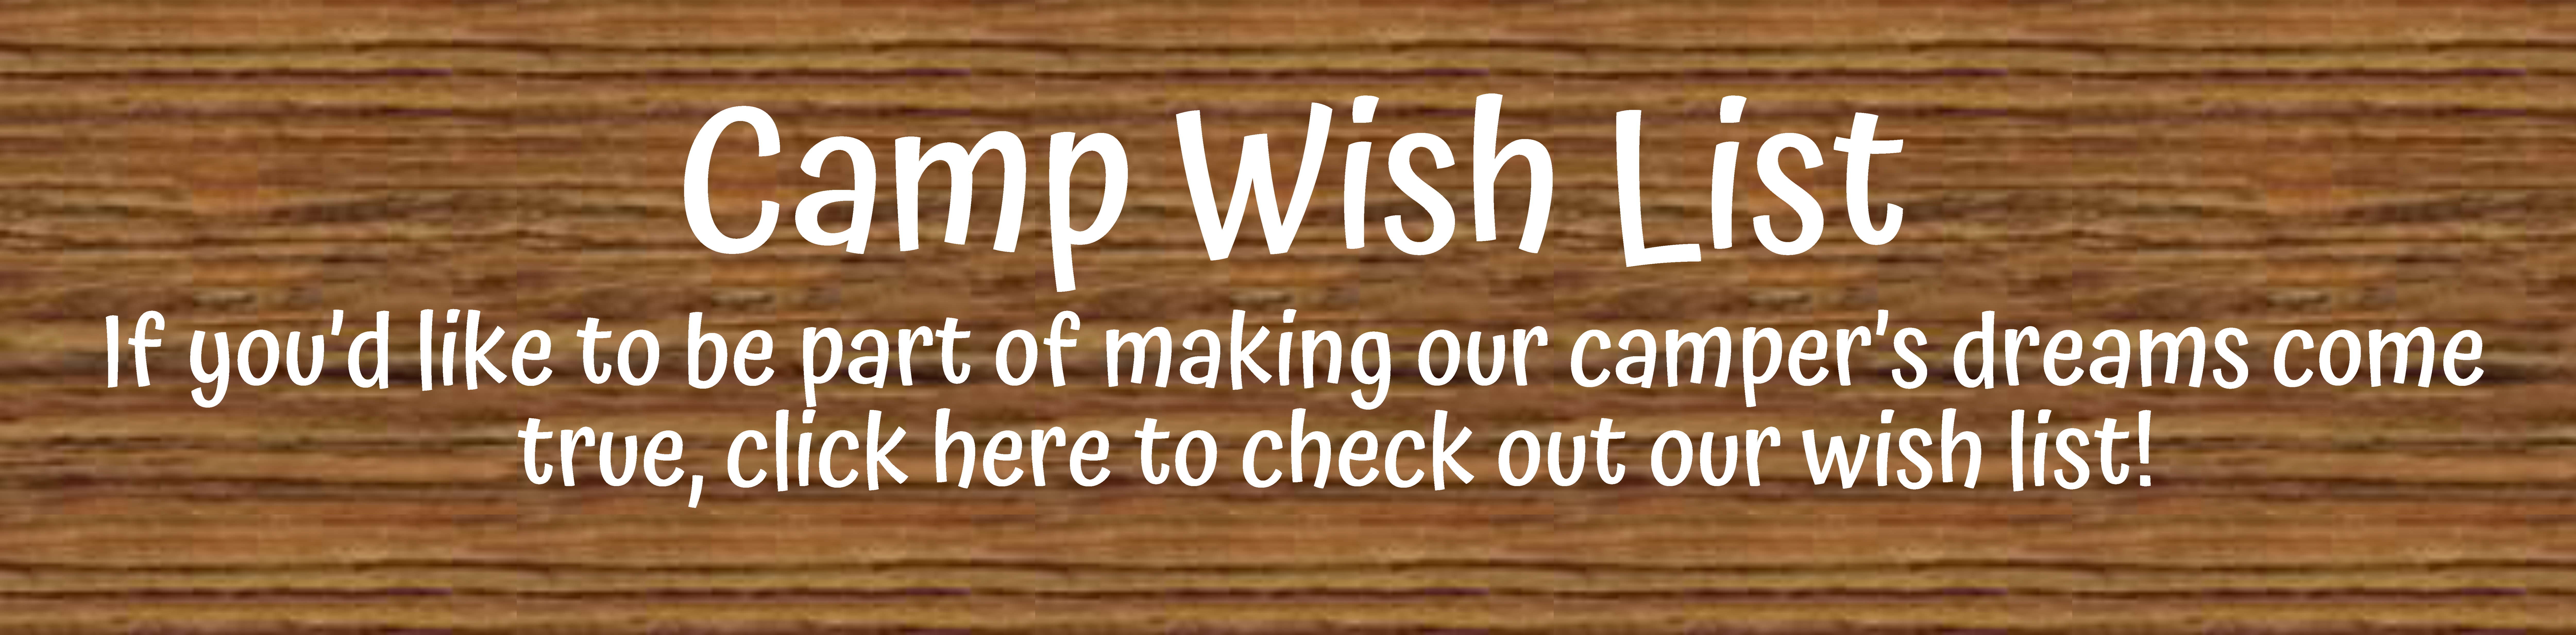 If you’d like to be part of making our camper's dreams come true, click here to check out our wish list!